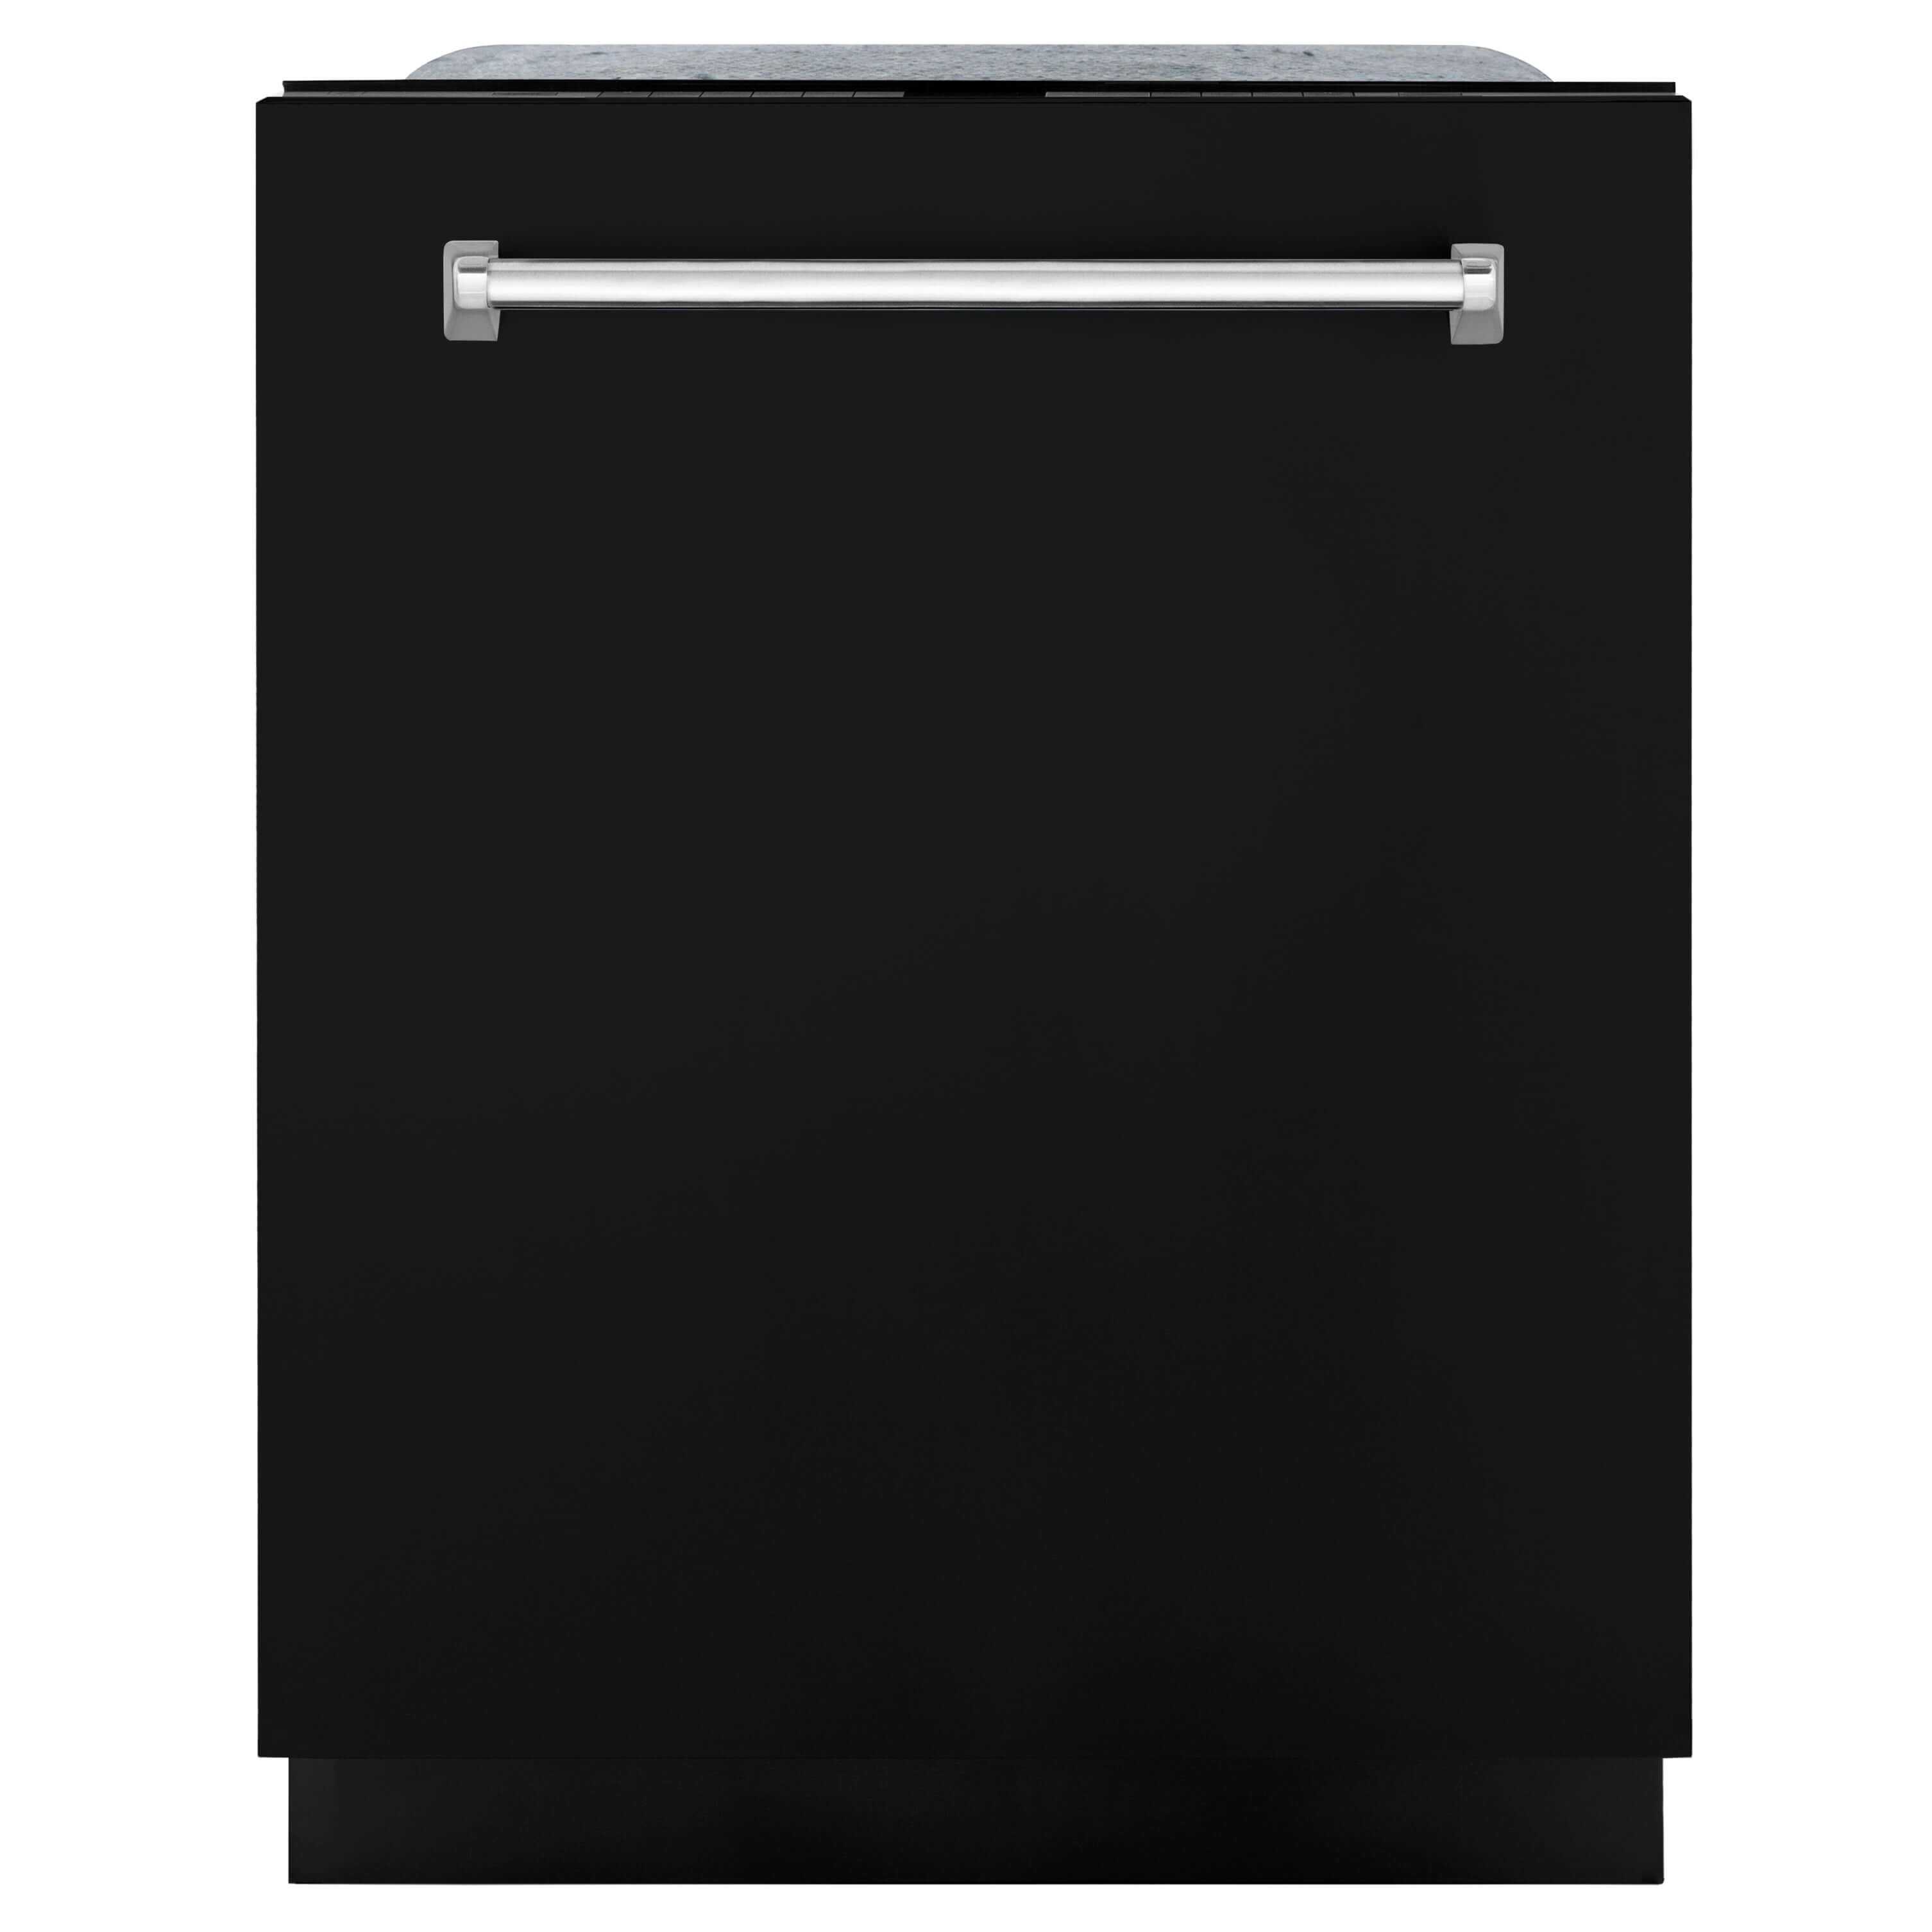 ZLINE 24" Monument Series 3rd Rack Top Touch Control Dishwasher in Black Matte with Stainless Steel Tub, 45dBa